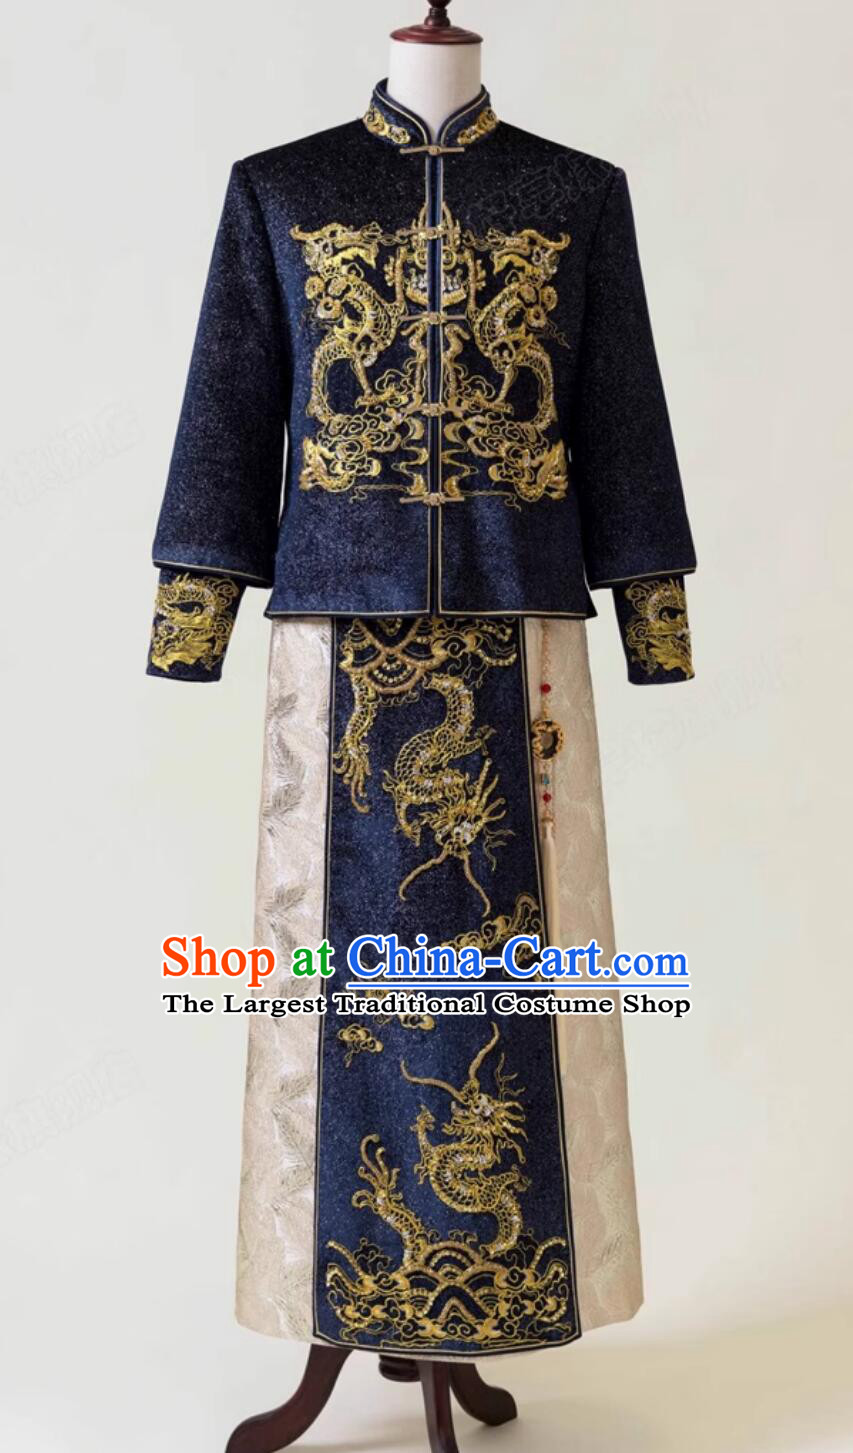 Chinese Male Xiuhe Suit Traditional Wedding Groom Attire Blue Mandarin Jacket and Long Gown Complete Set